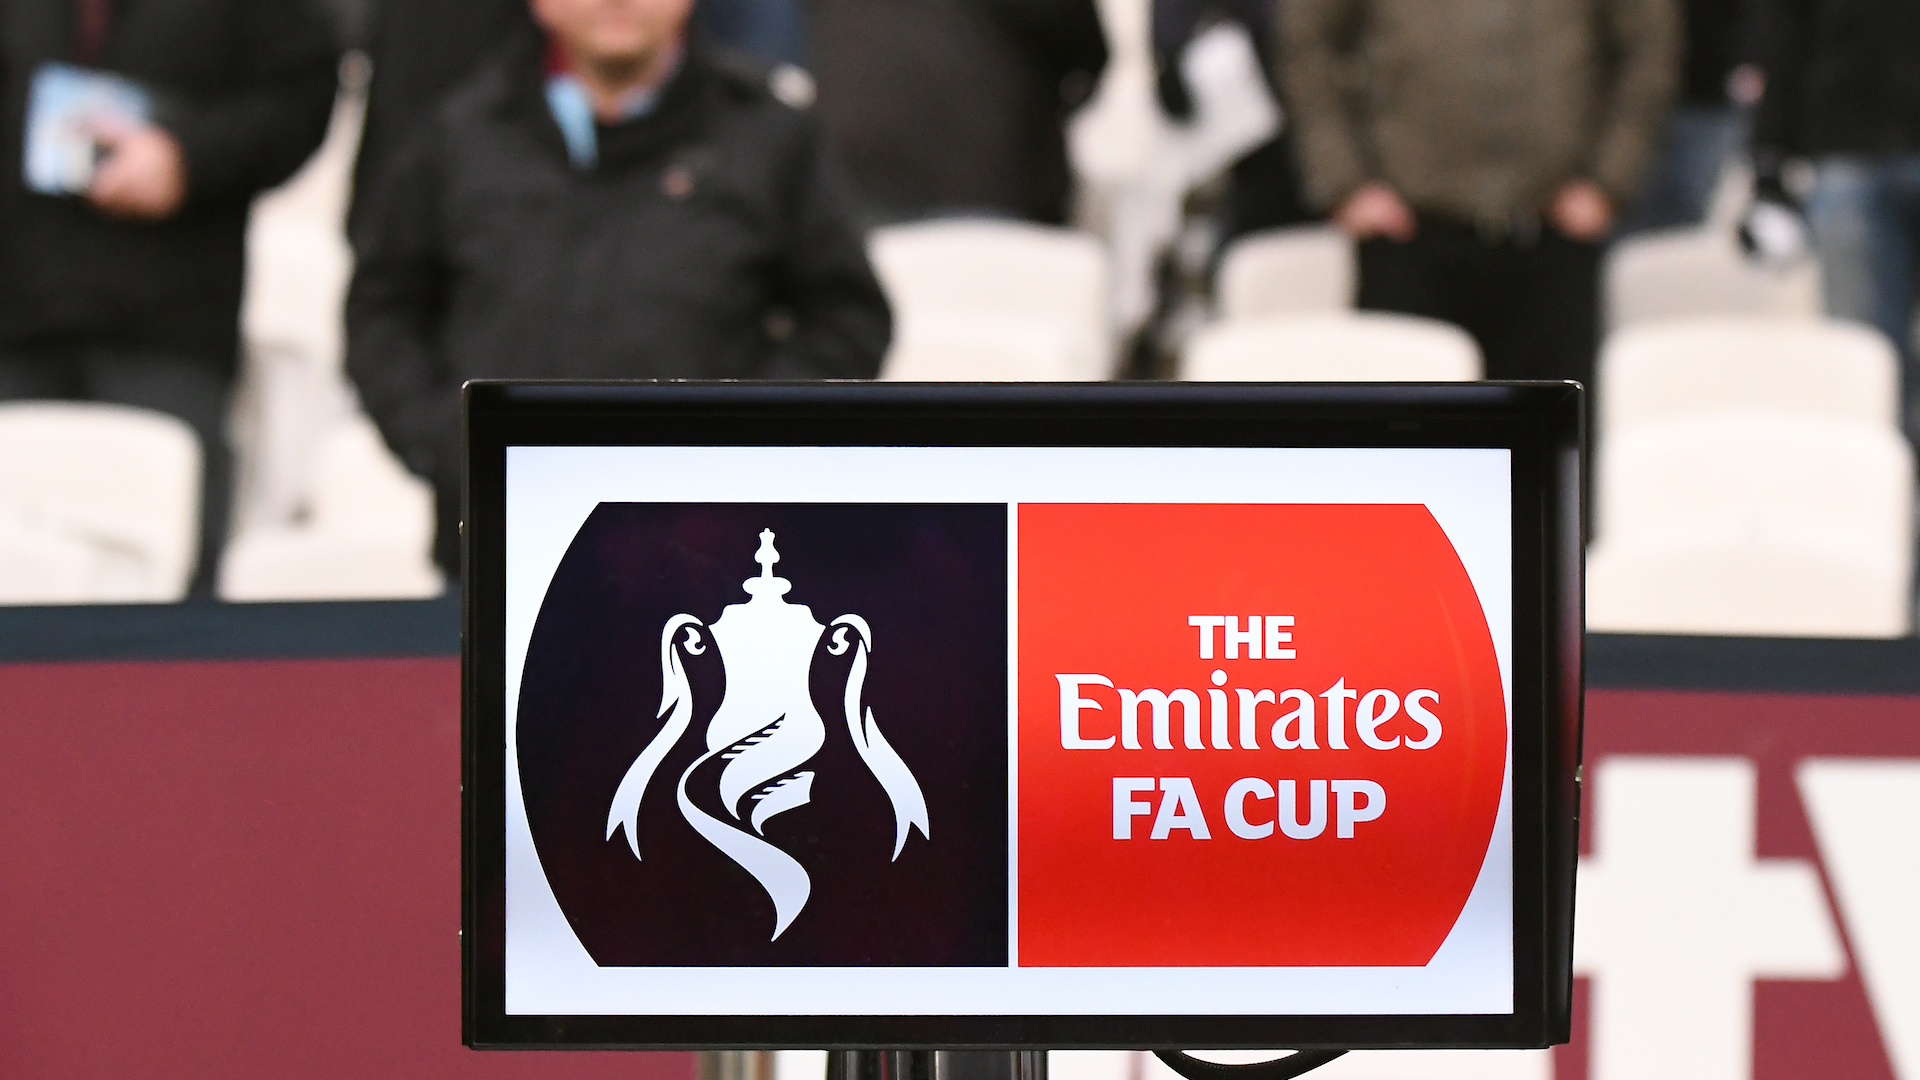 FA Cup sign at a football match